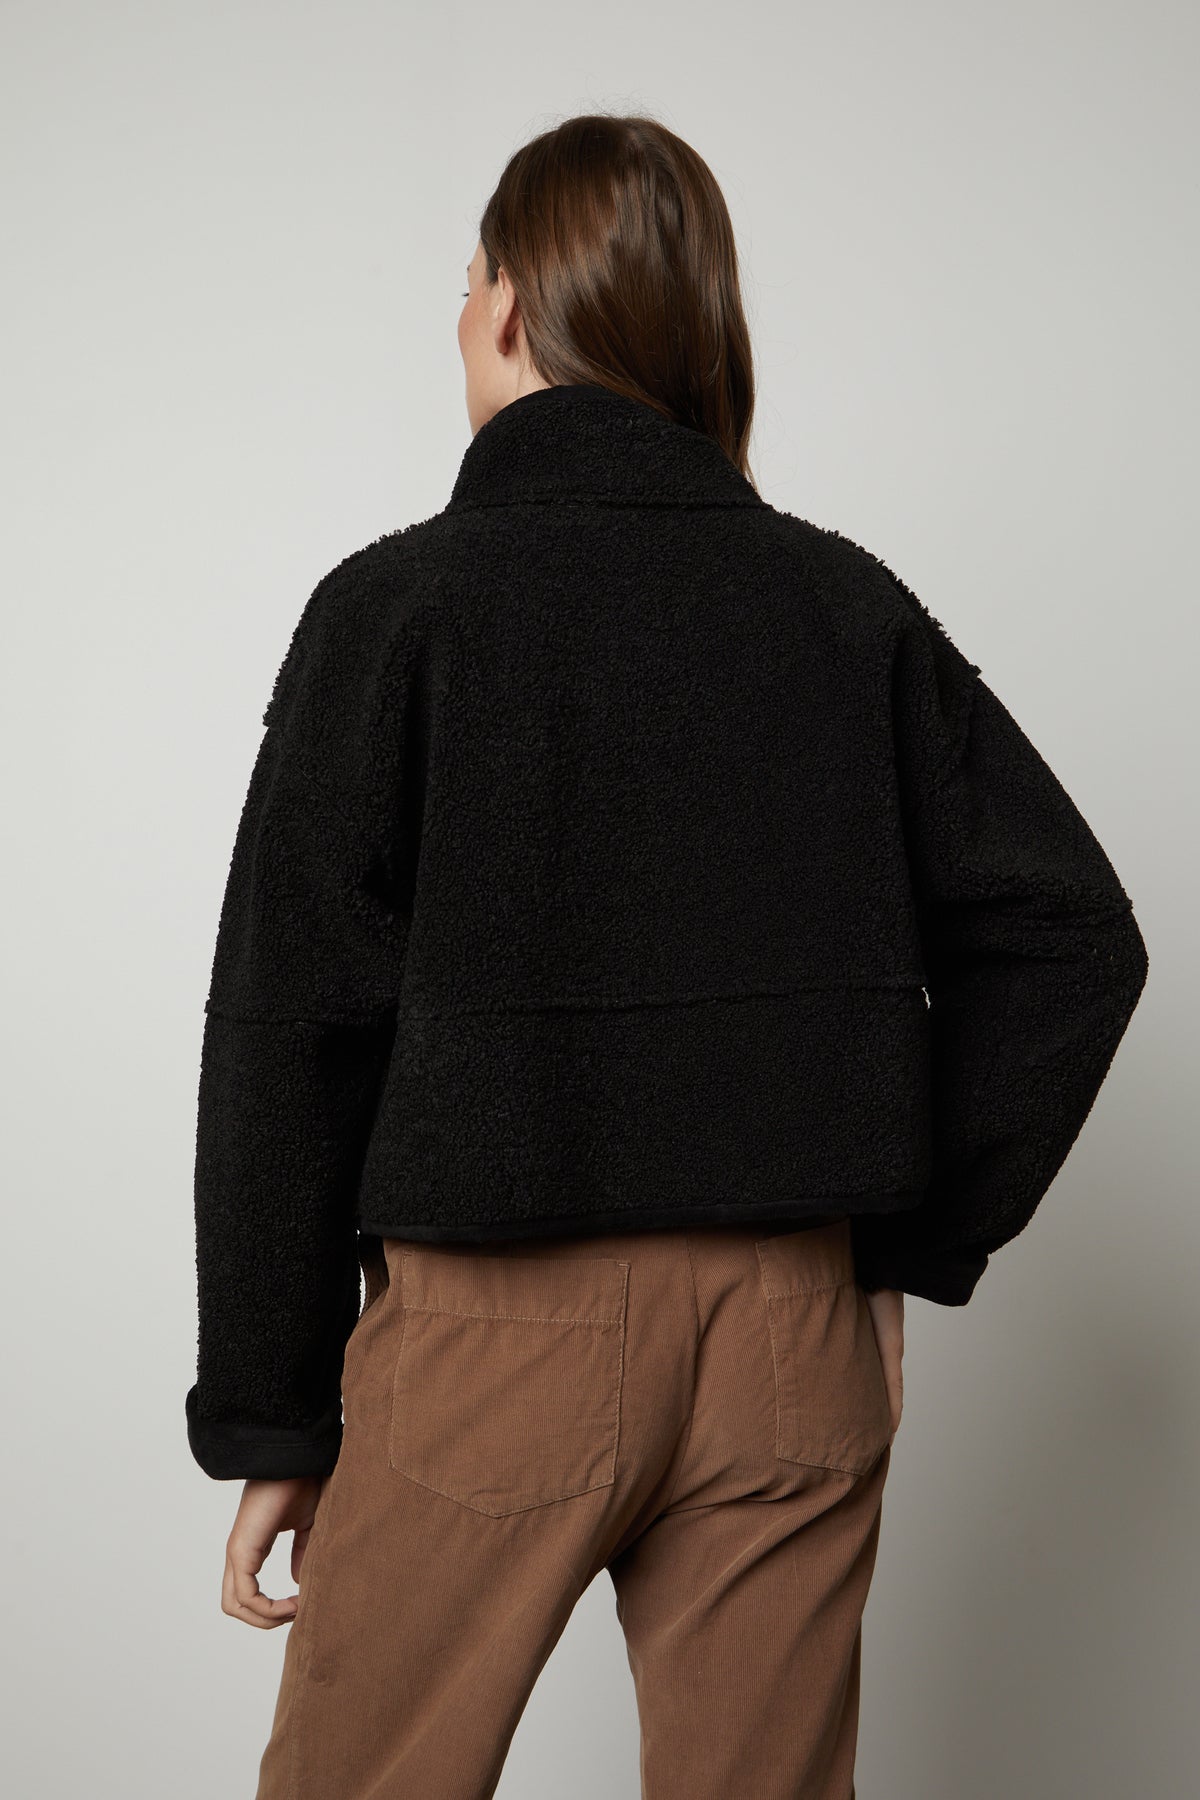 The back view of a woman wearing a Velvet by Graham & Spencer KELLY LUX SHERPA REVERSIBLE JACKET and brown pants.-26910369185985